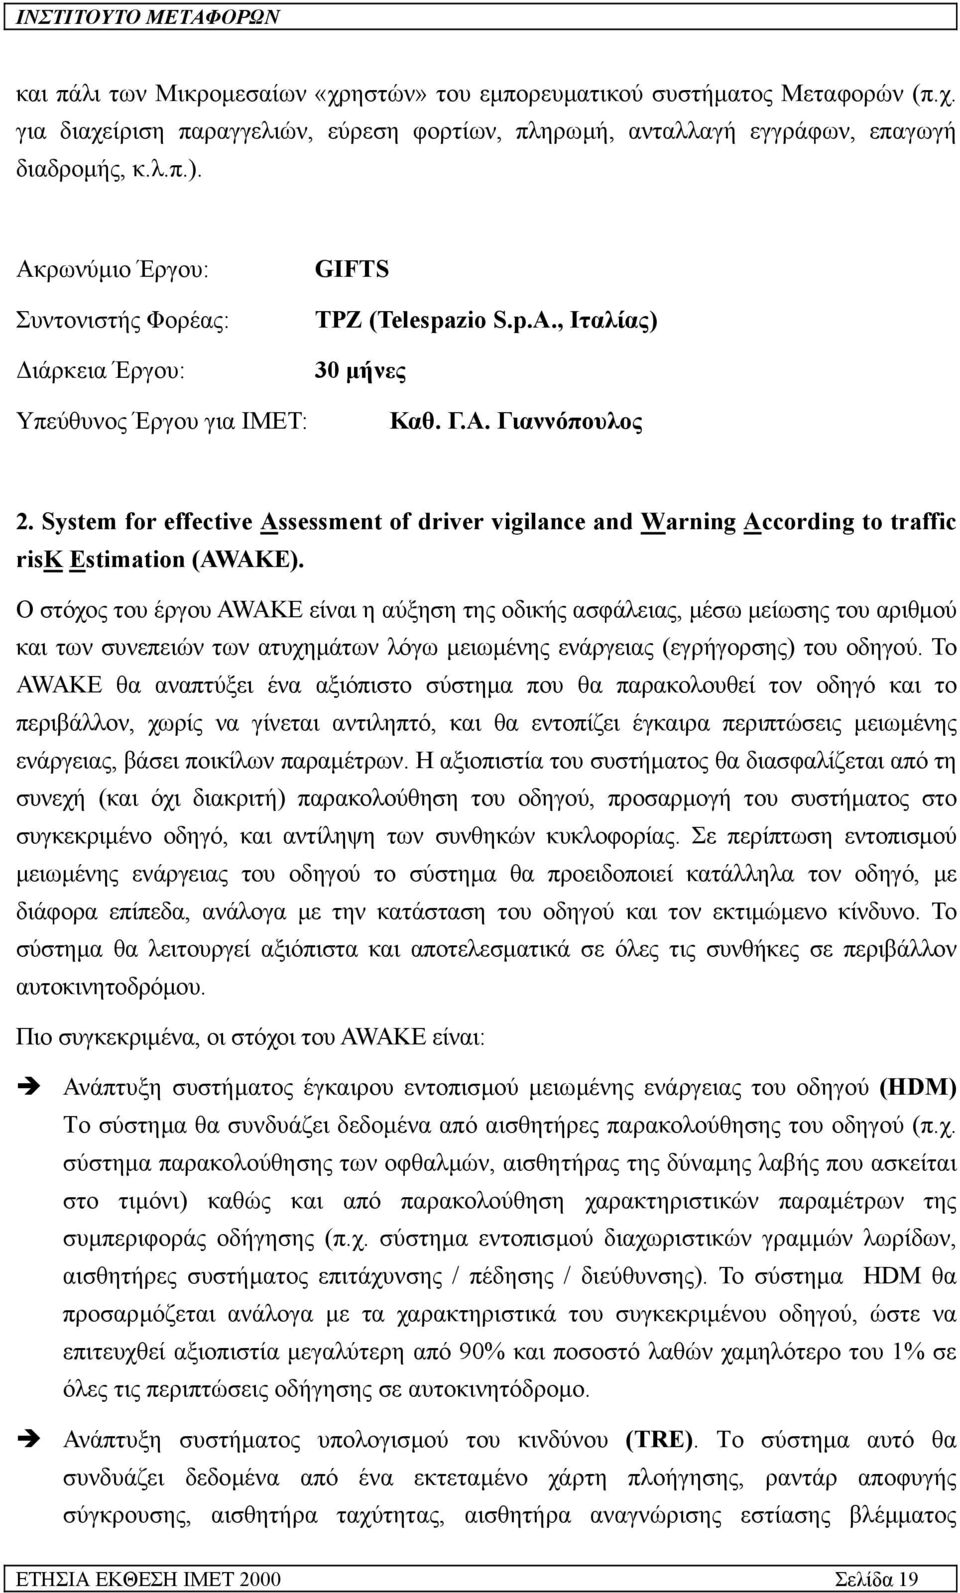 System for effective Assessment of driver vigilance and Warning According to traffic risk Estimation (AWAKE).